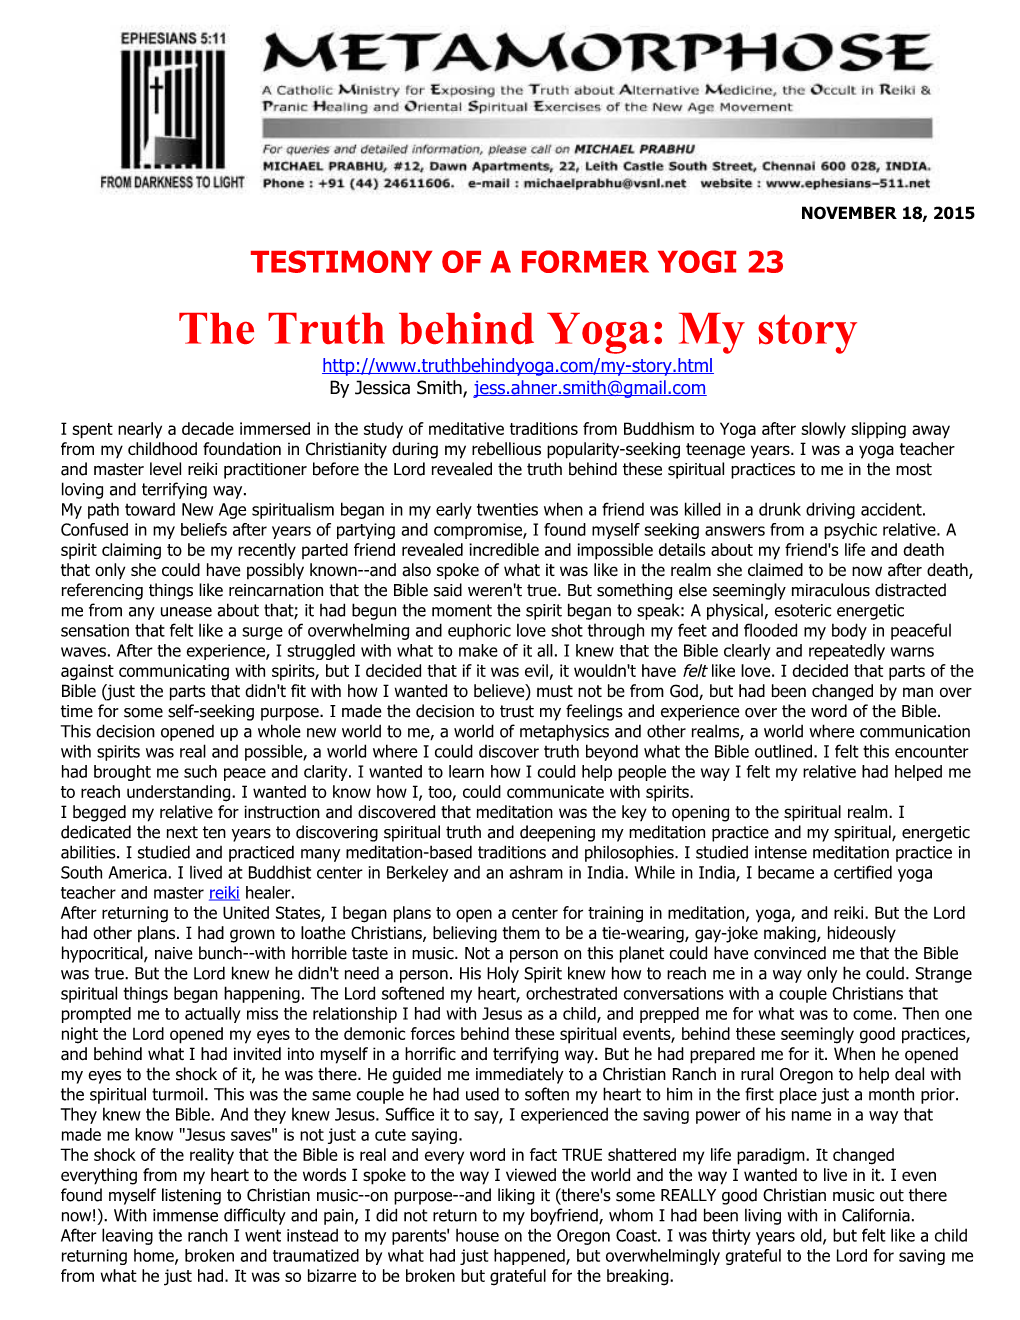 The Truth Behind Yoga: My Story